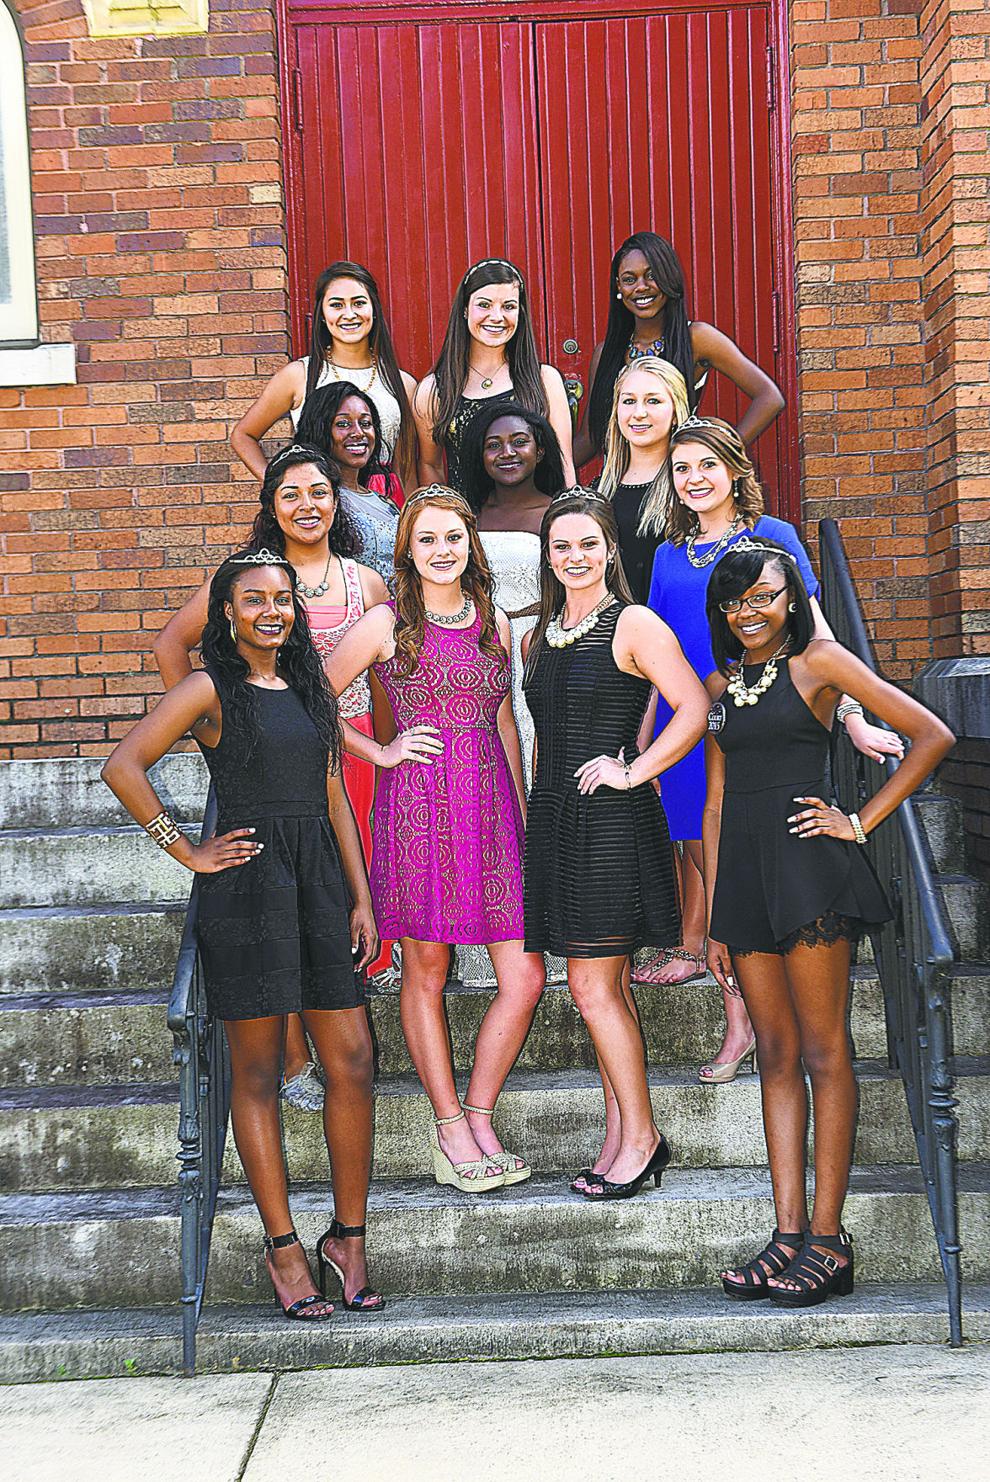 Homecoming queen to be named tonight Local News moultrieobserver com